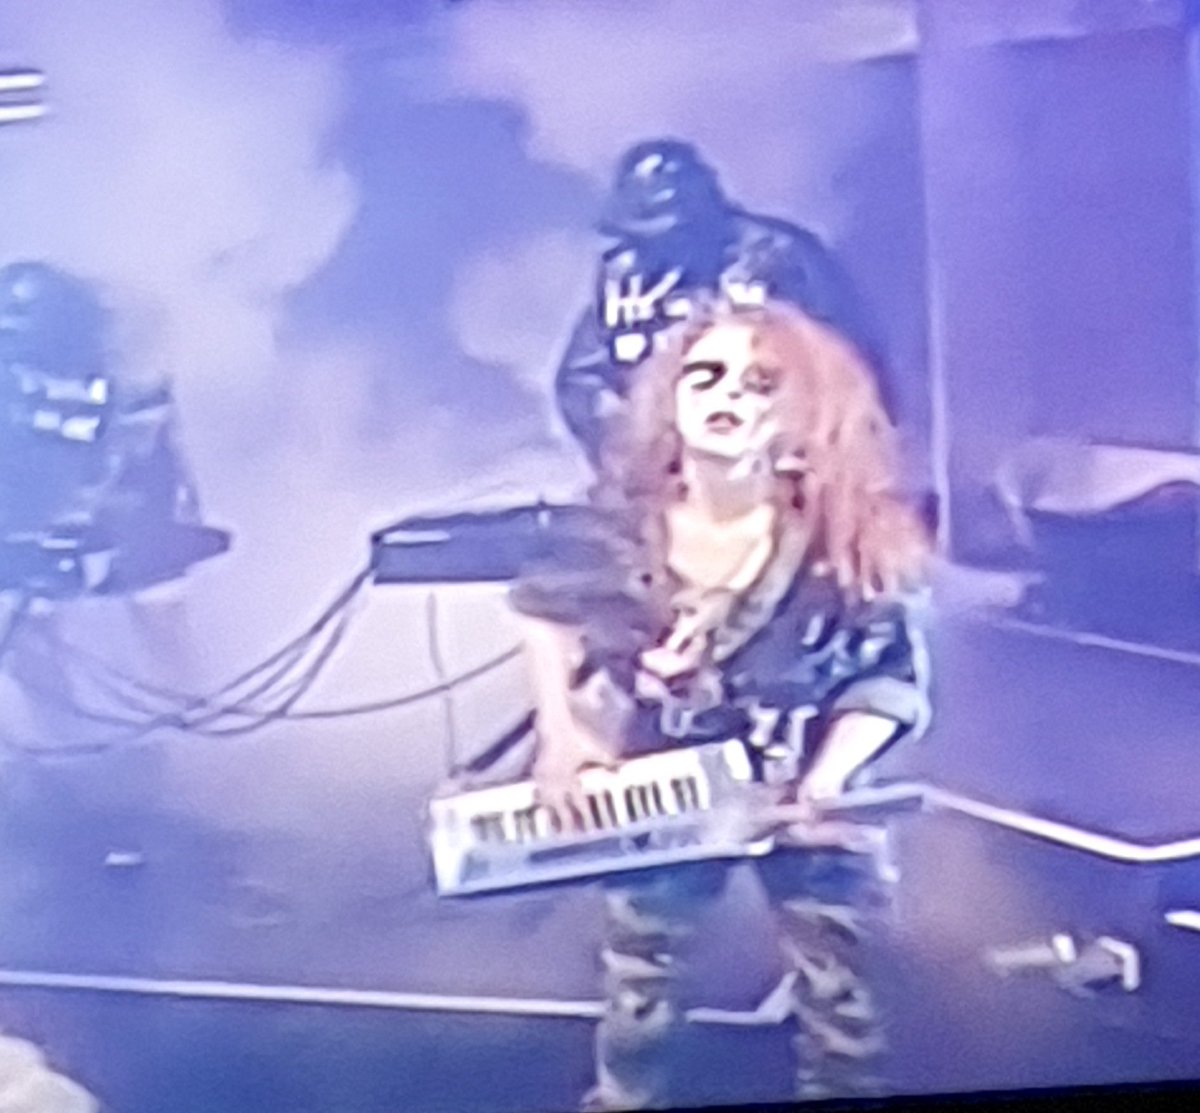 More Keytars! 1990 what a time to be alive! #TOTP